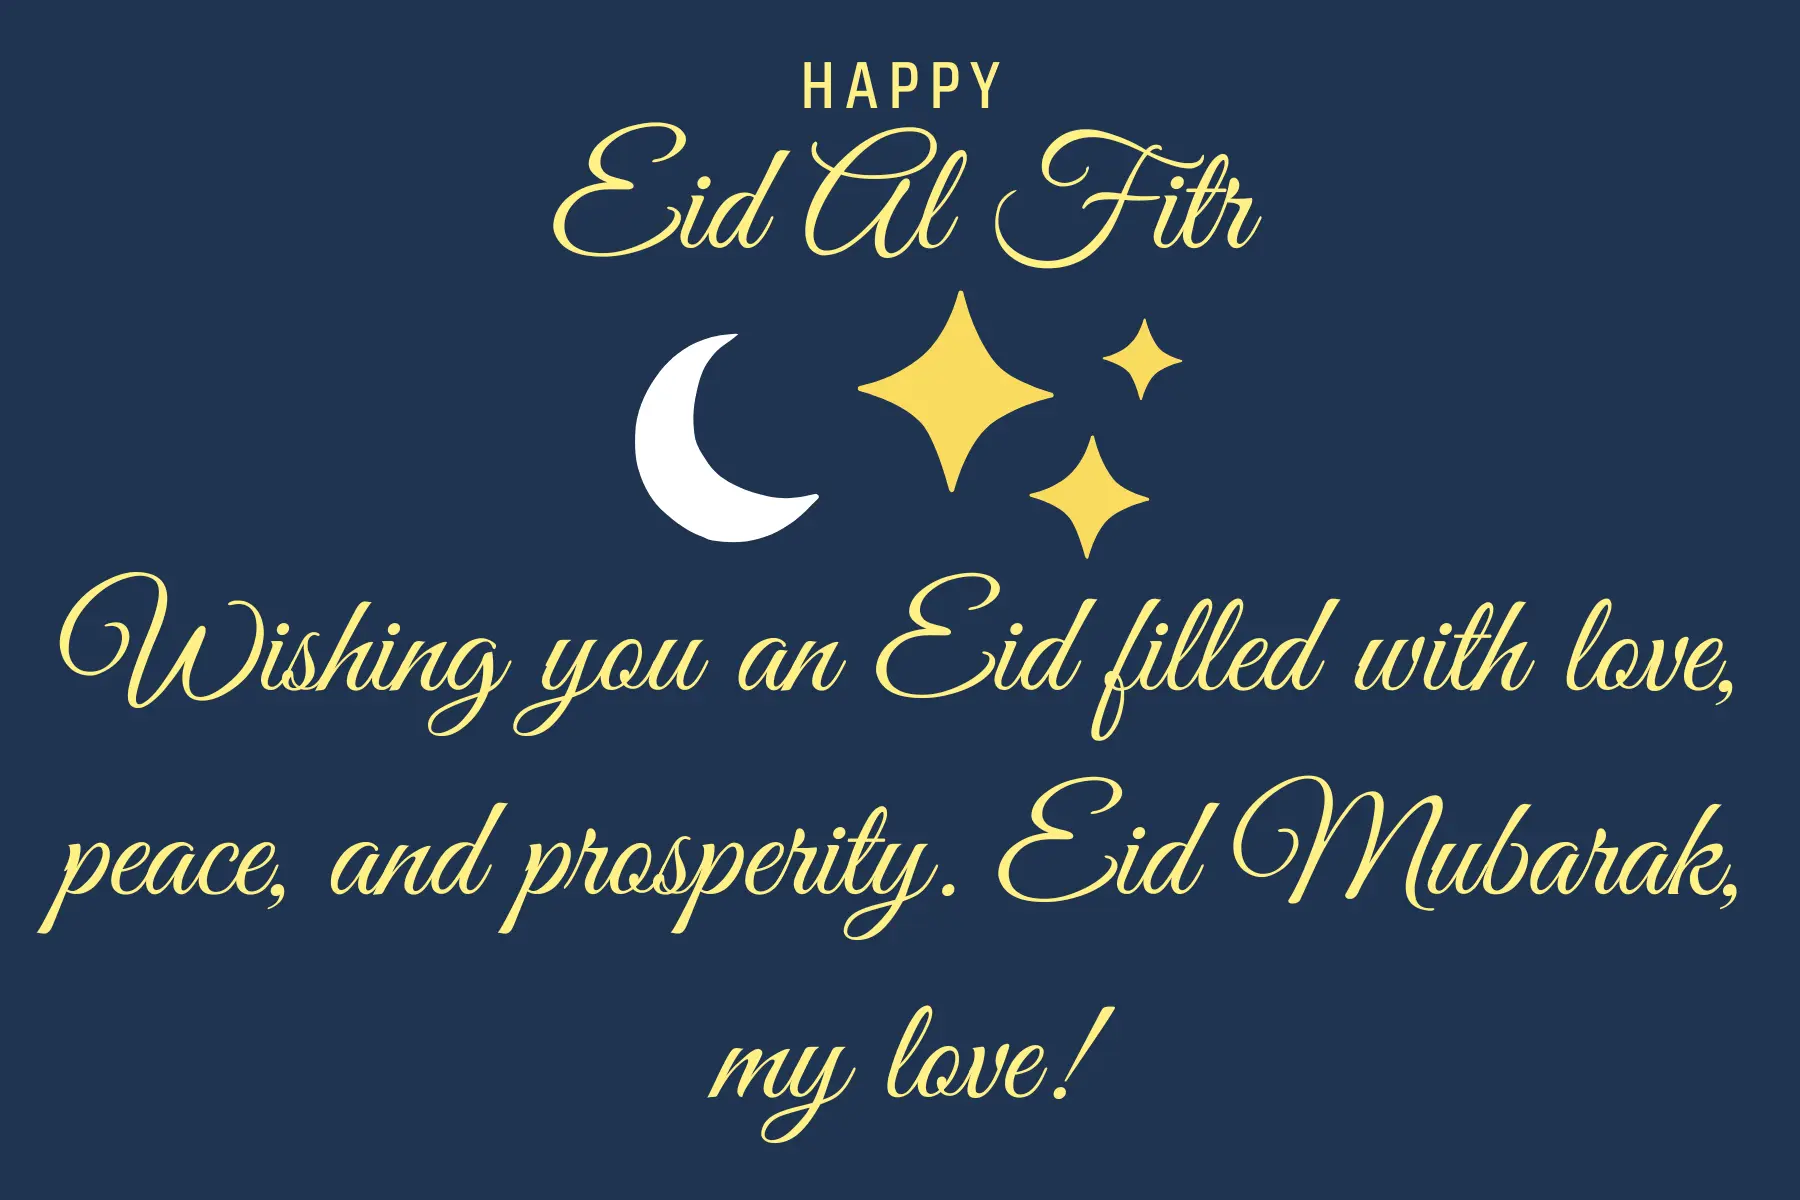 Happy Eid Mubarak Wishes And Messages For Love: